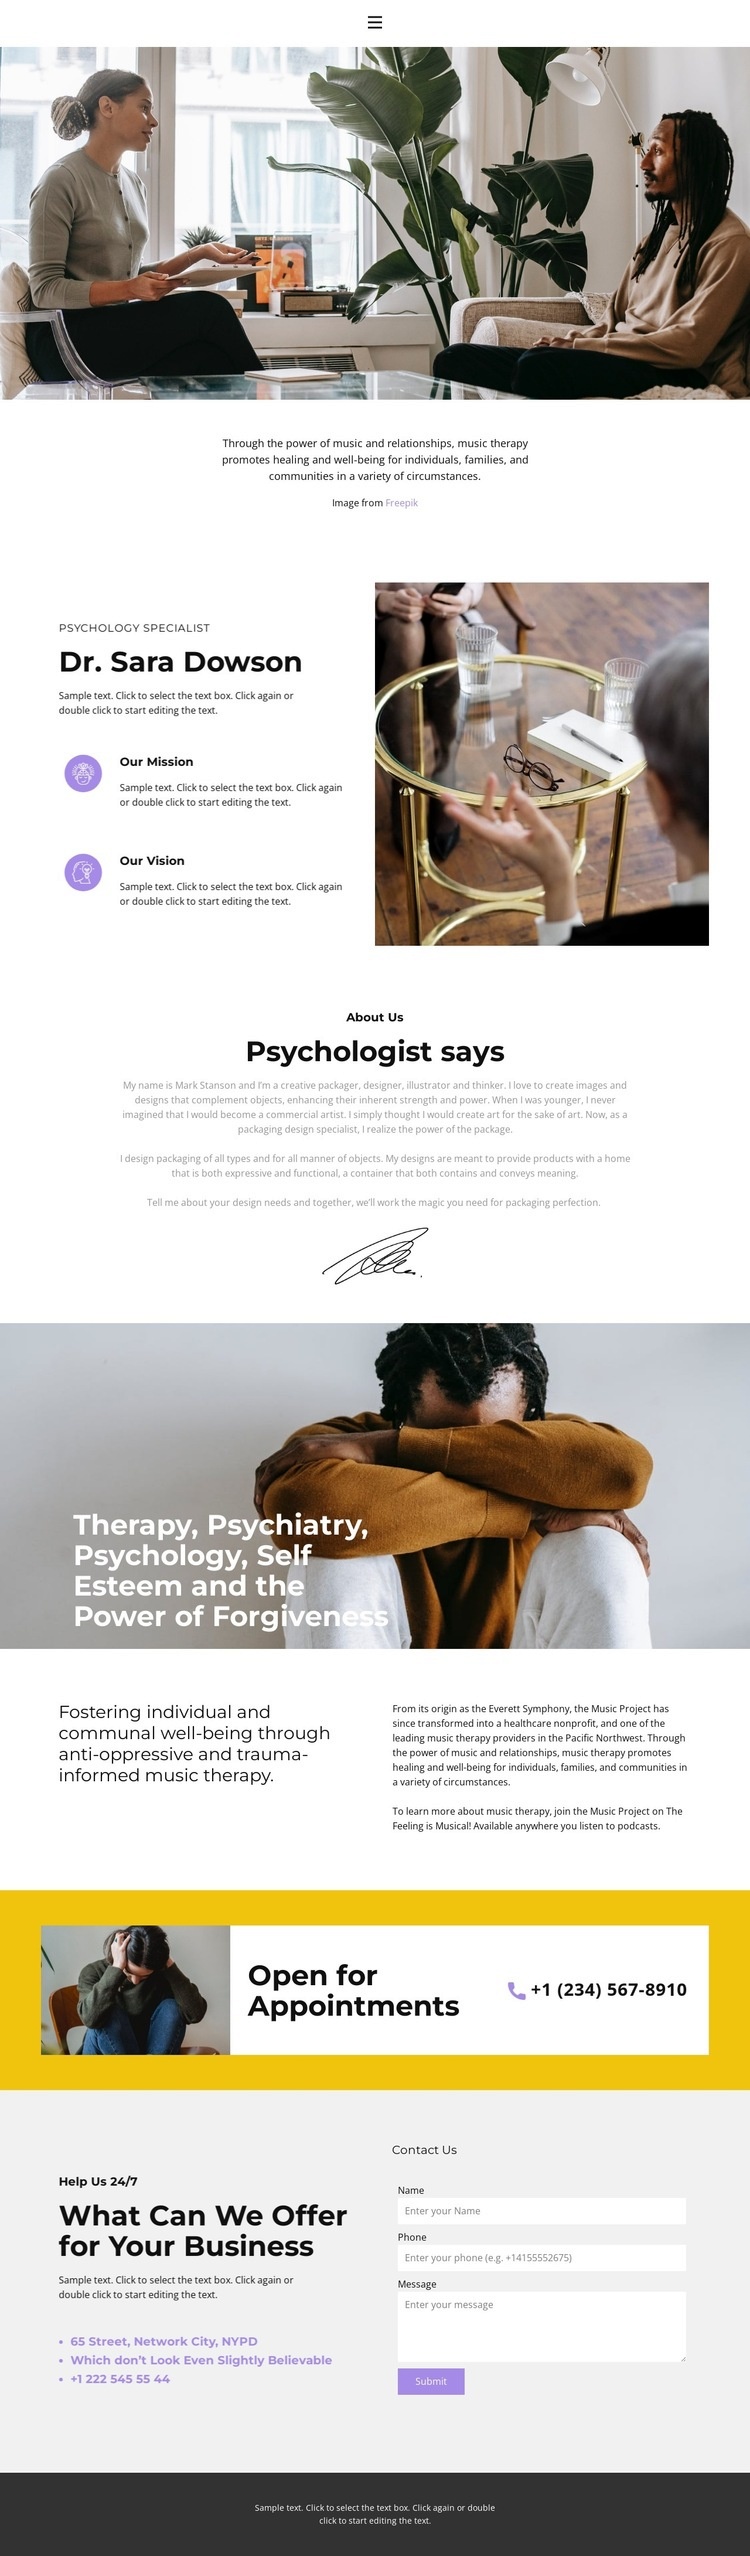 Qualified help from a psychologist Squarespace Template Alternative